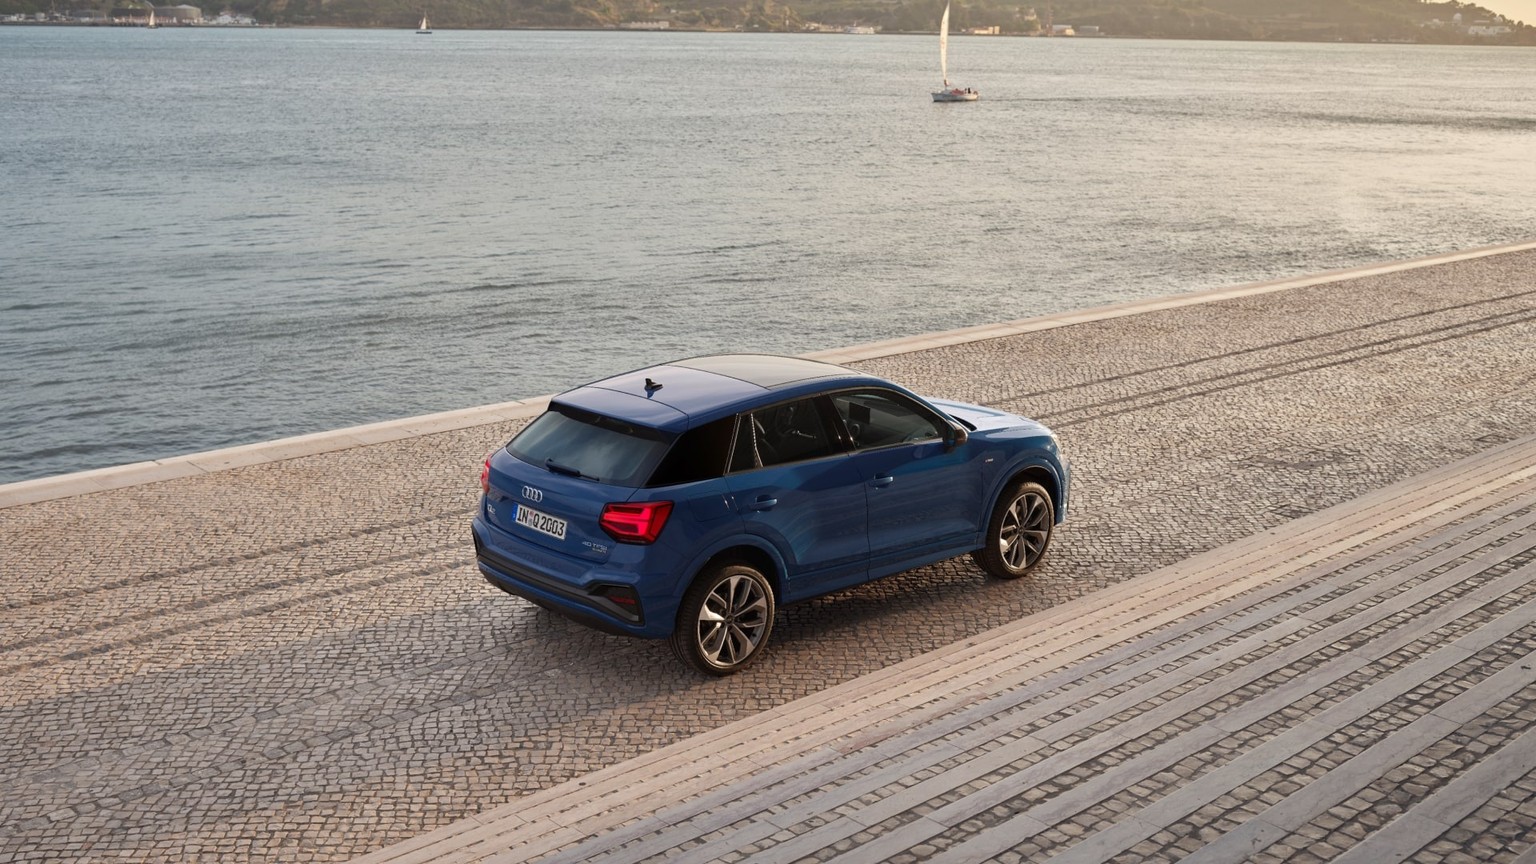 Top-side view of the Audi Q2